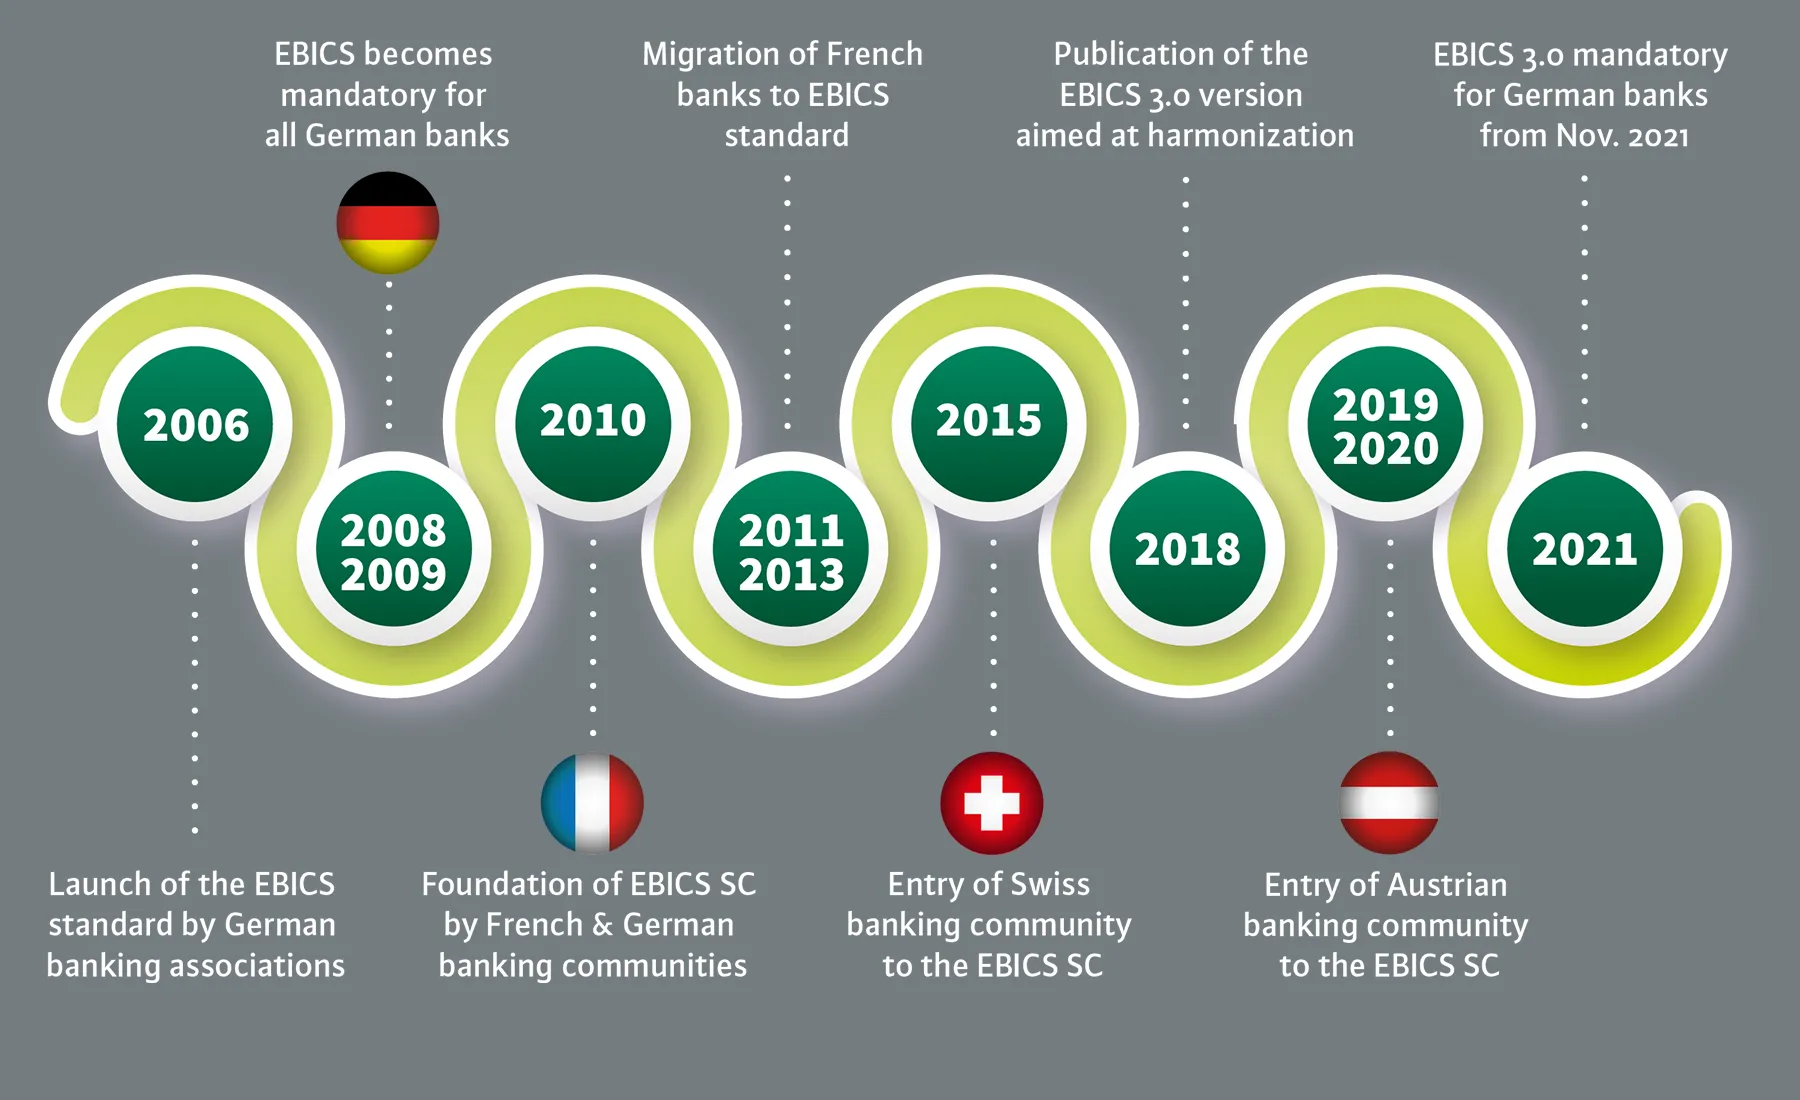 Facts on the evolution of the EBICS standard